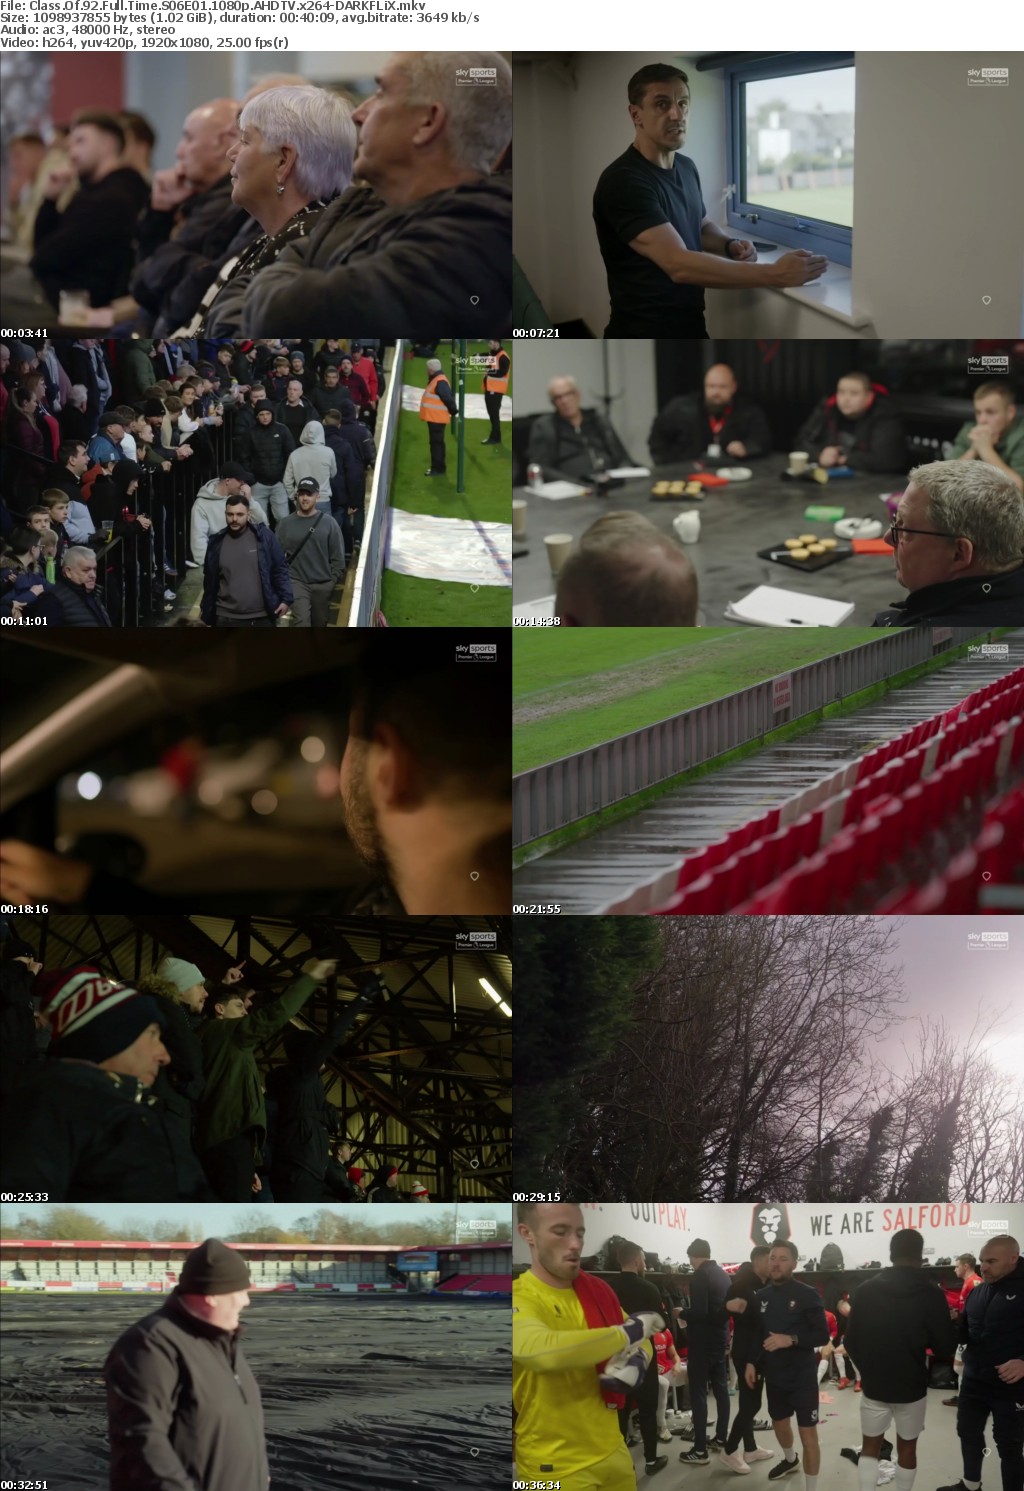 Class Of 92 Full Time S06E01 1080p AHDTV x264-DARKFLiX